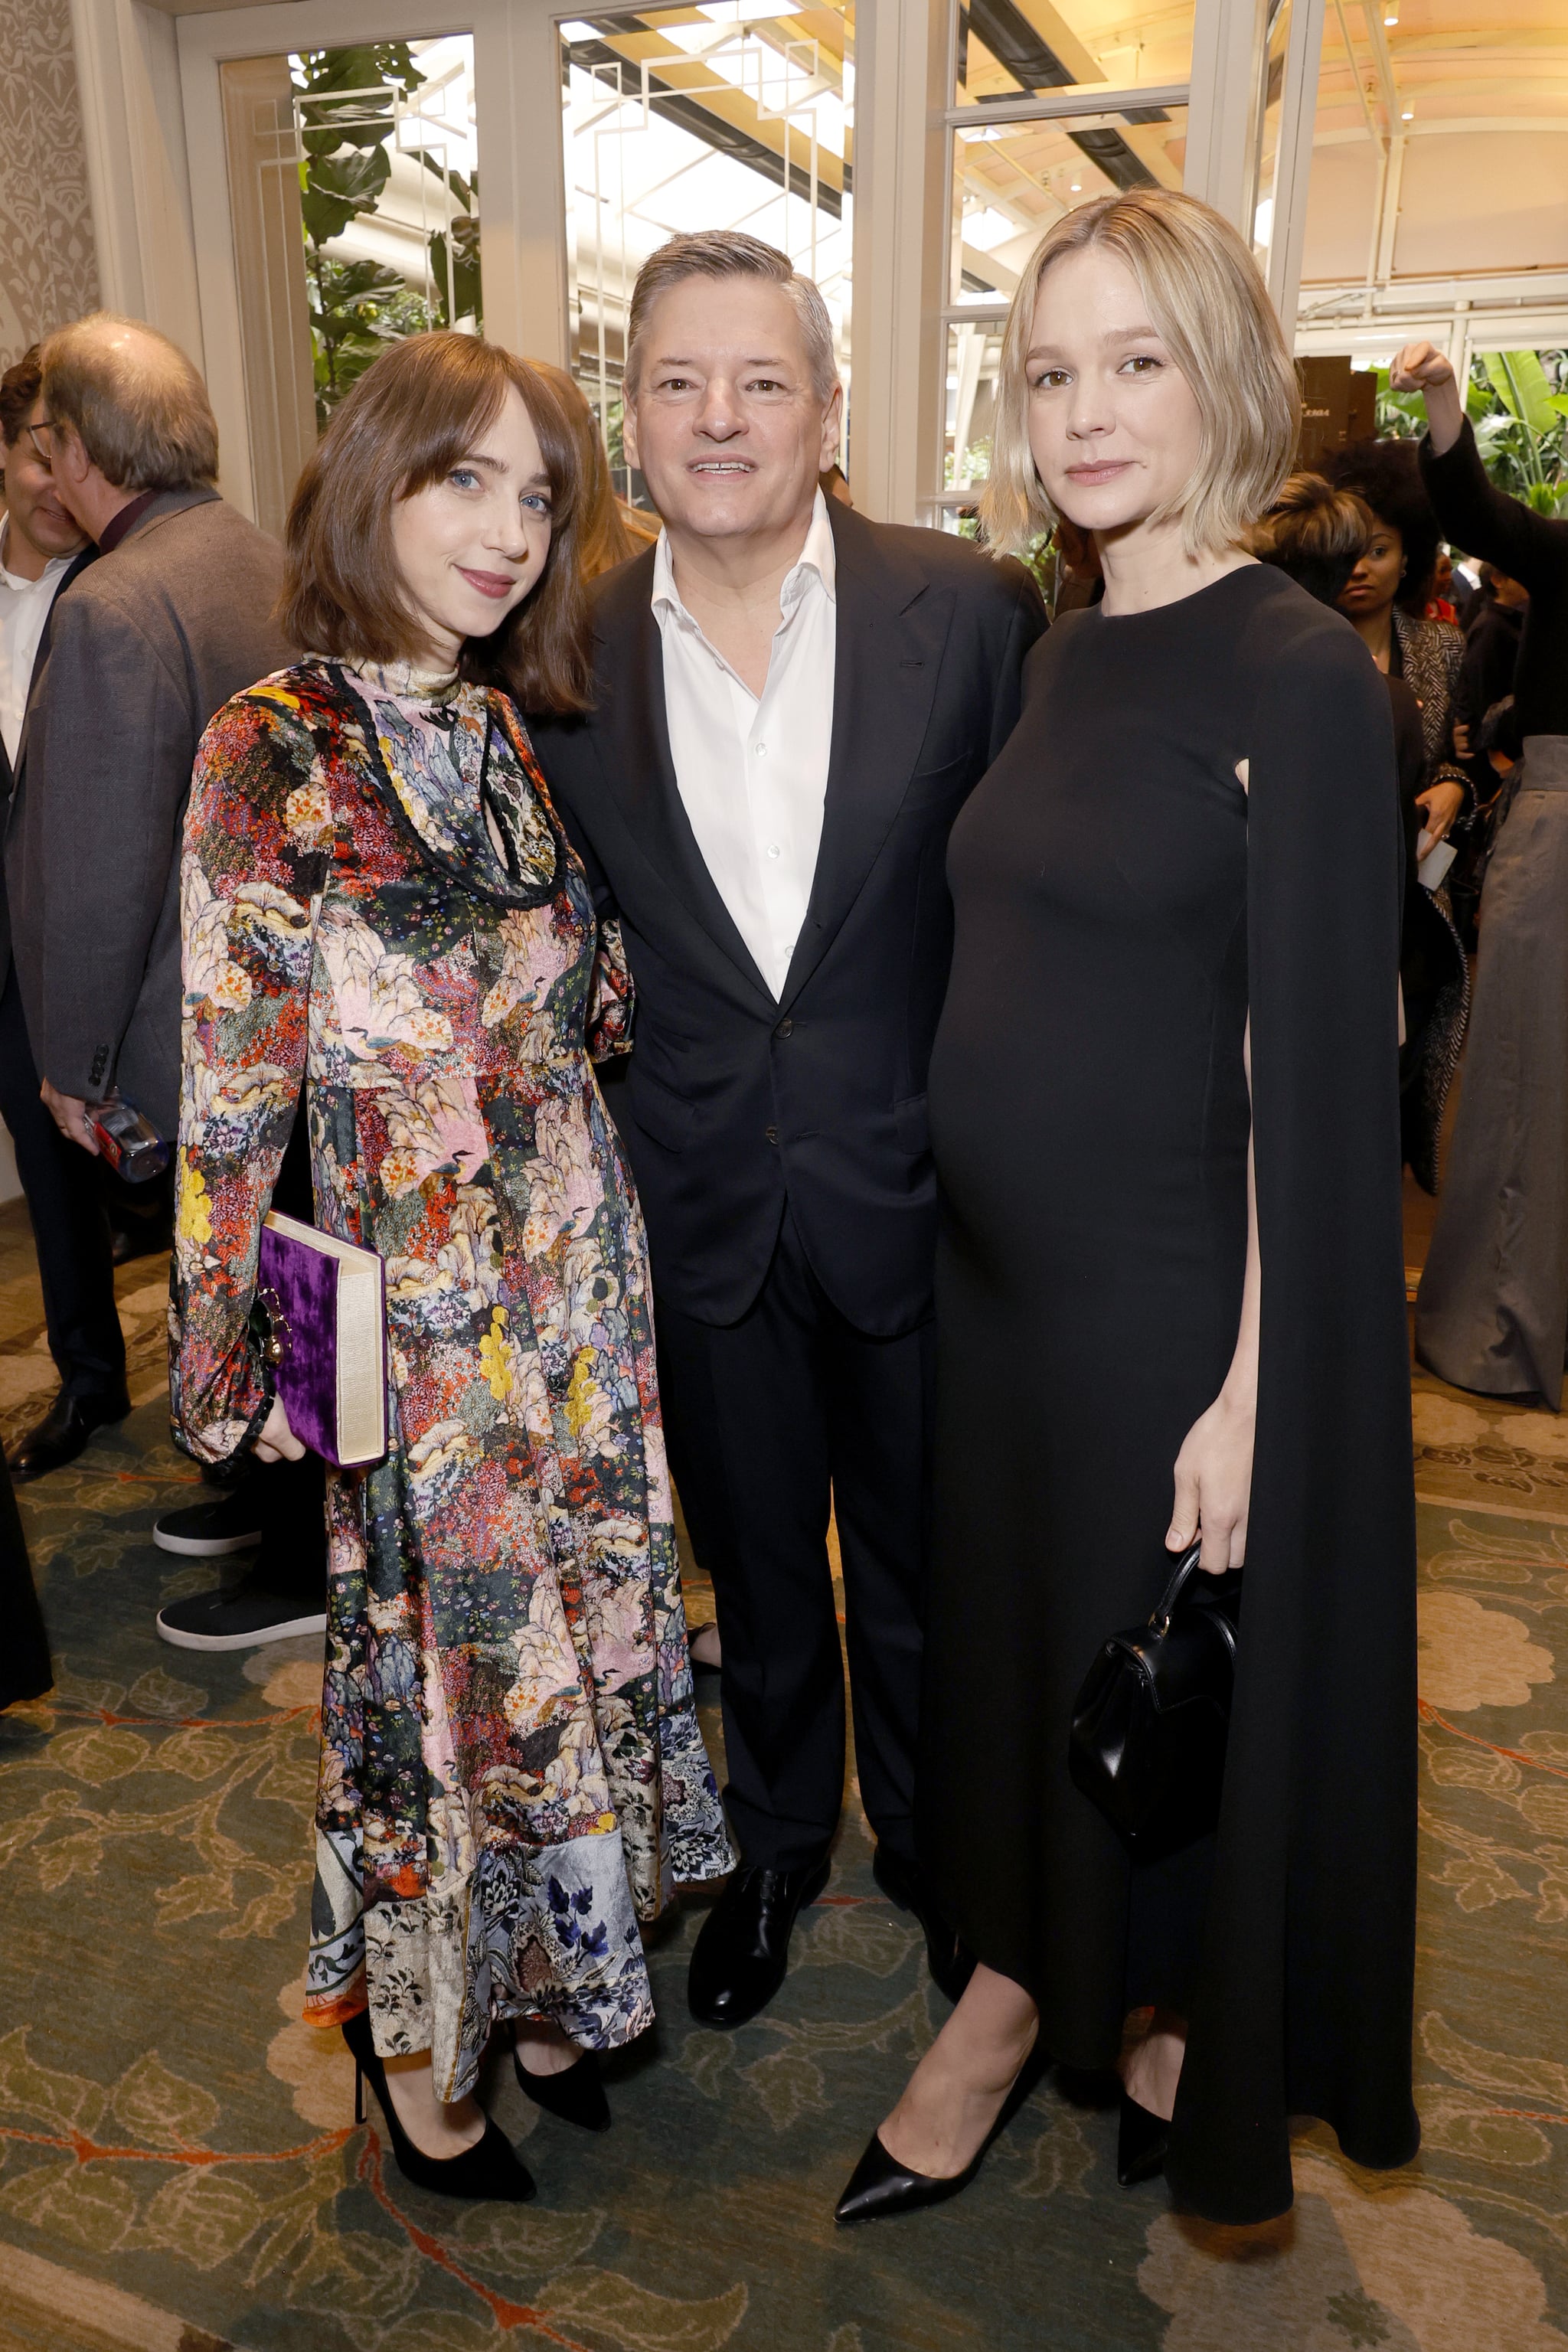 LOS ANGELES, CALIFORNIA - JANUARY 13: (L-R) Zoe Kazan, Netflix Co-CEO and Chief Content Officer Ted Sarandos and Carey Mulligan attend the AFI Awards Luncheon at Four Seasons Hotel Los Angeles at Beverly Hills on January 13, 2023 in Los Angeles, California. (Photo by Frazer Harrison/Getty Images)